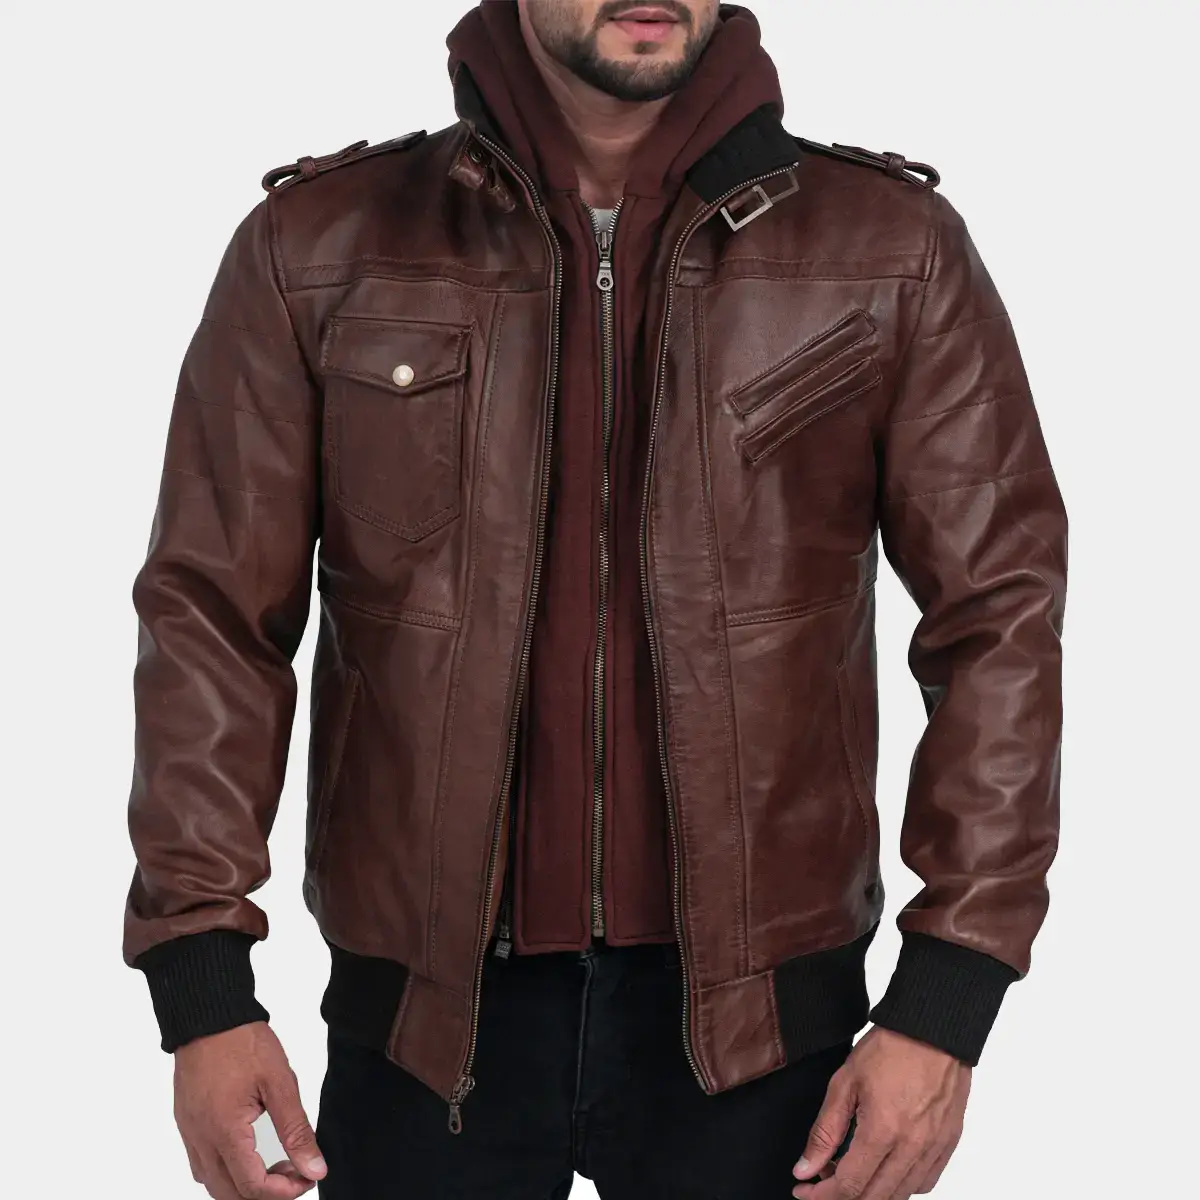 Brown Hooded Leather Jacket for Men – Real Leathers Jacket